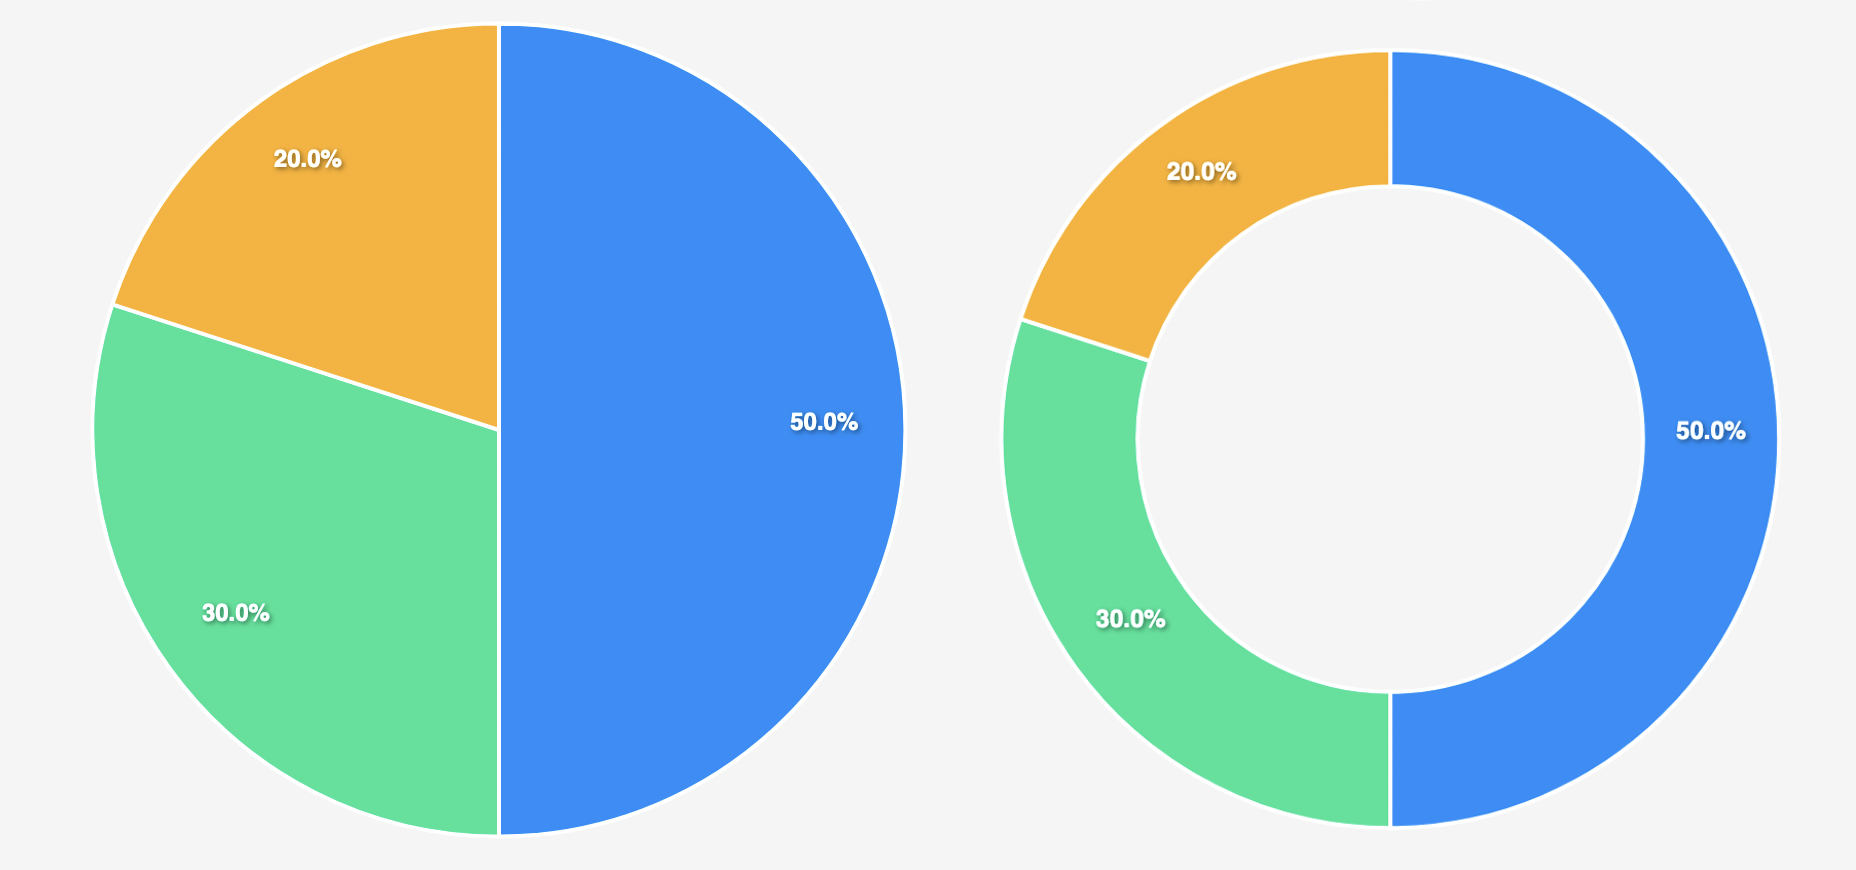 Comparison of the Pie Chart (left) and the Donut Chart (right)